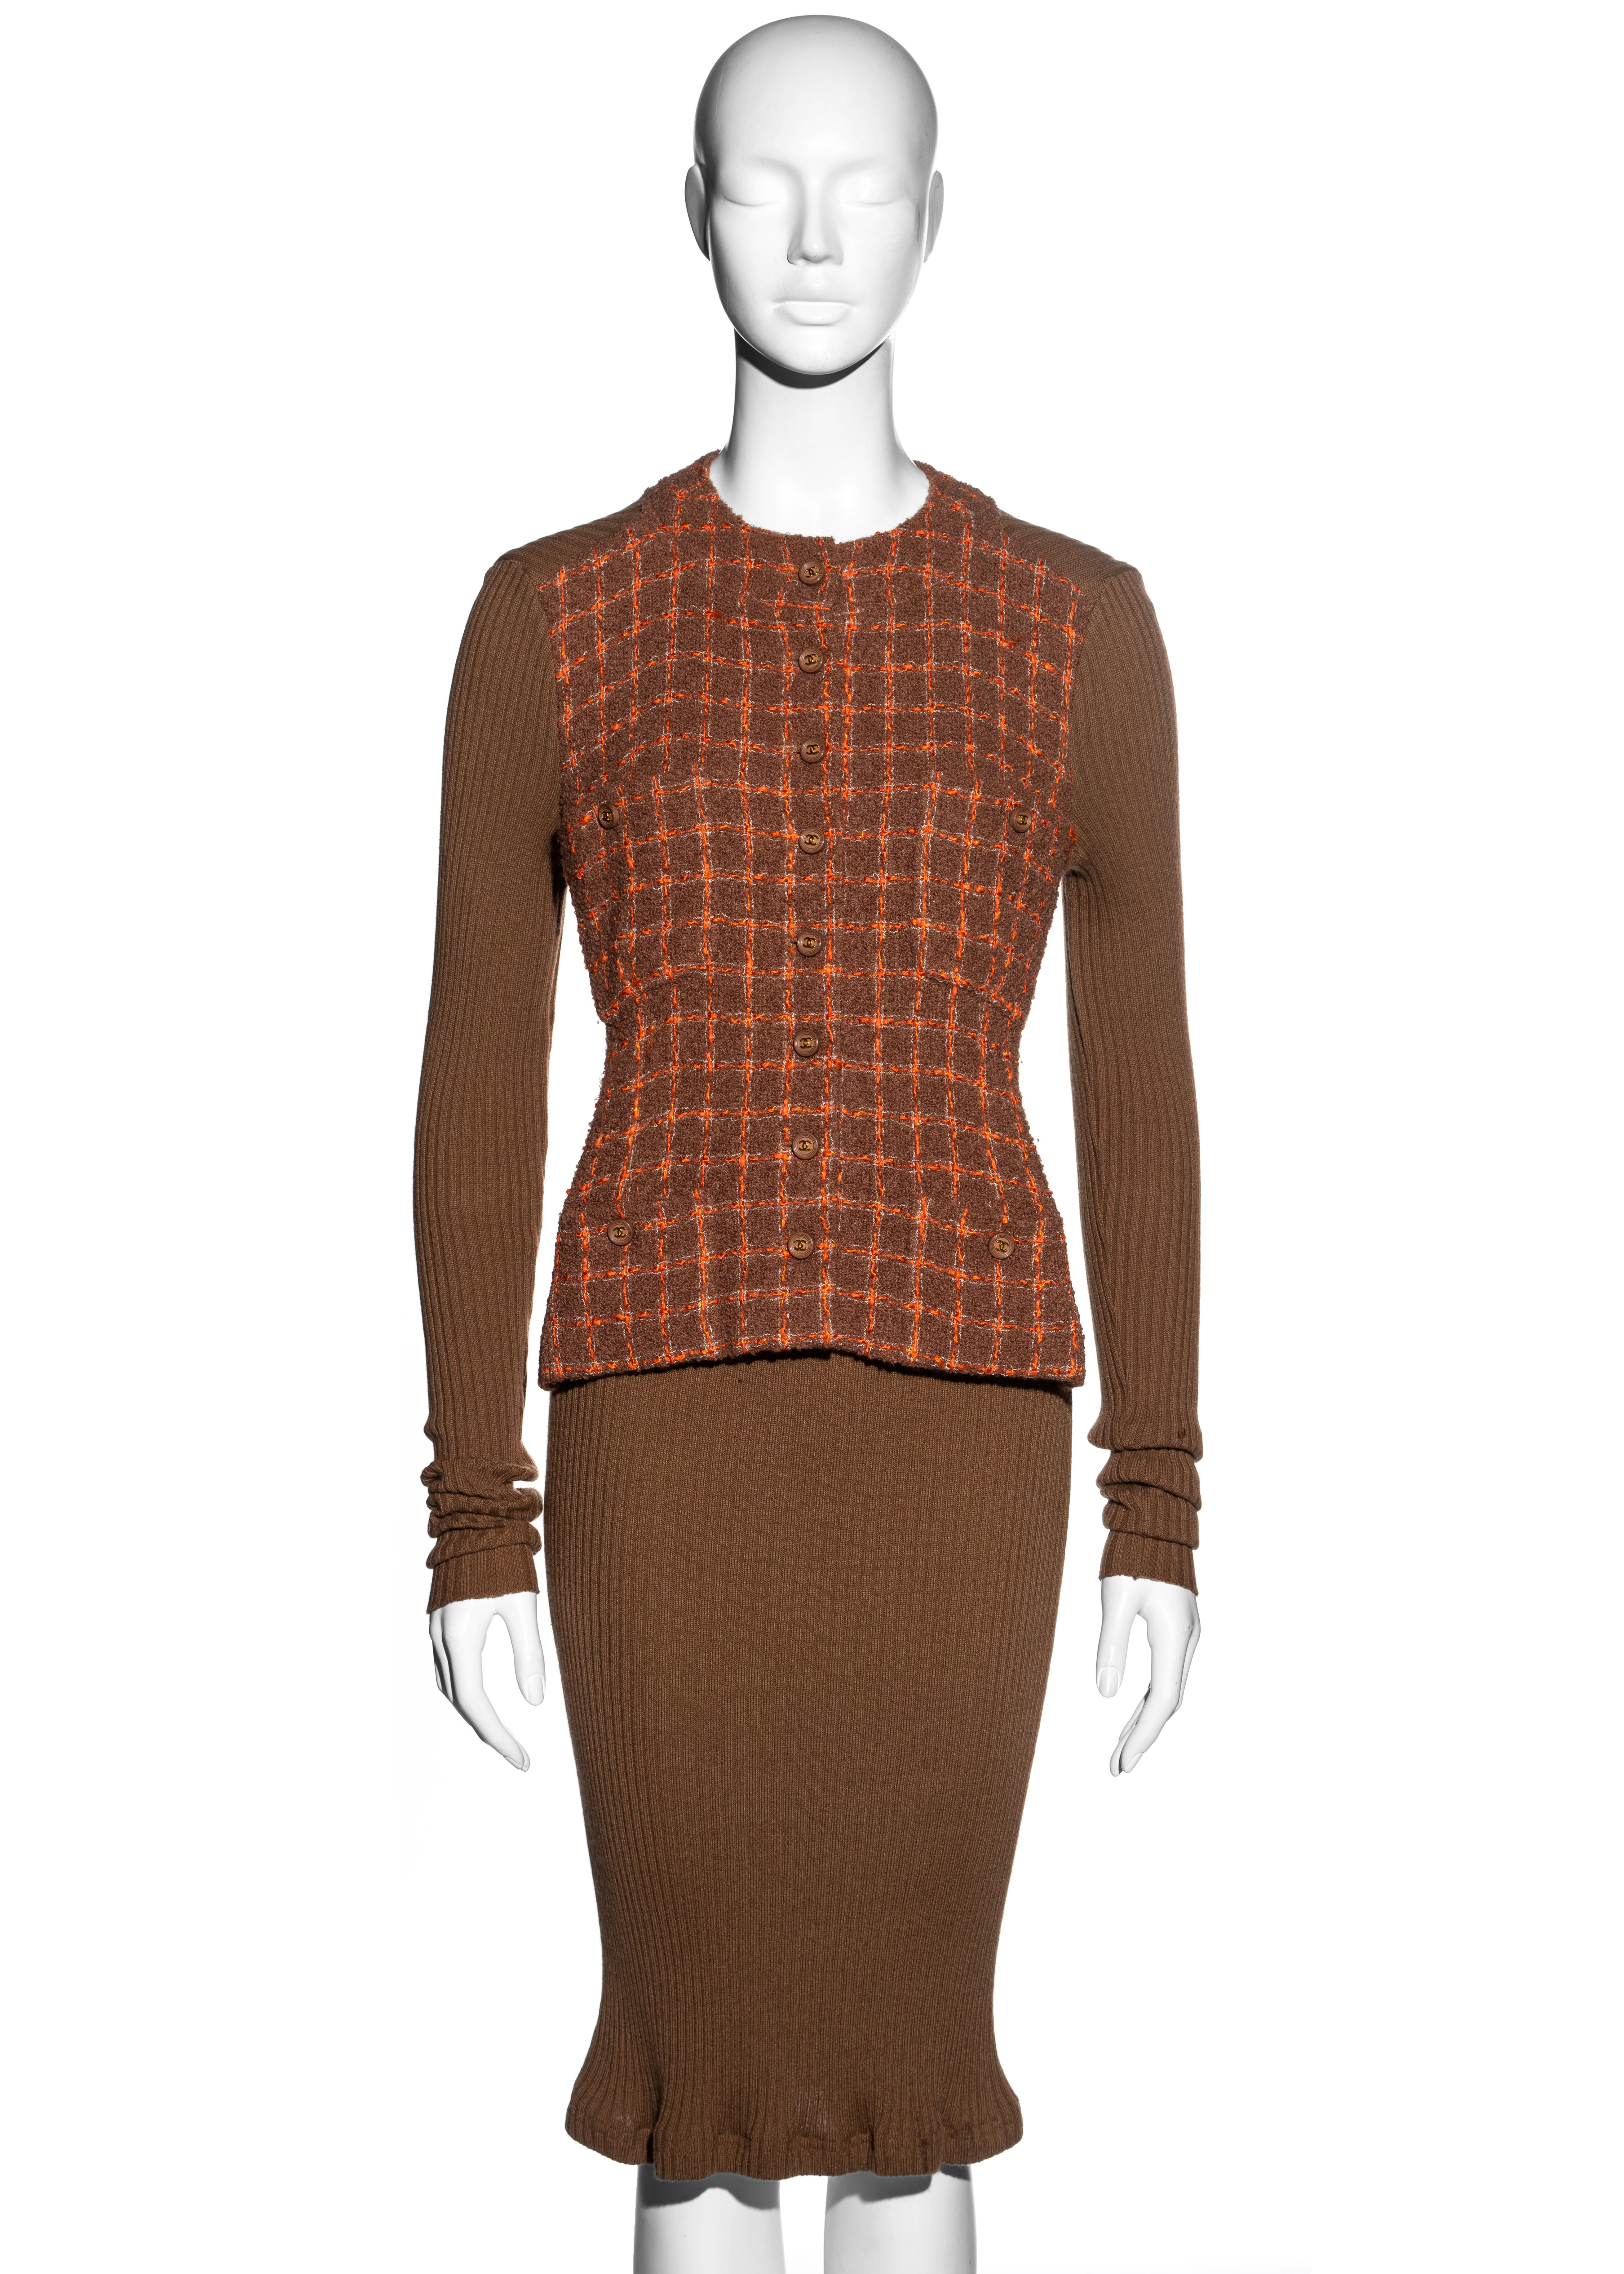 ▪ Chanel orange and brown rib knit wool dress 
▪ Designed by Karl Lagerfeld 
▪ Checked boucle jacket attached to front of dress 
▪ CC logo buttons 
▪ 4 front pockets 
▪ Long knitted sleeves 
▪ FR 38 - UK 10 - US 6
▪ Fall-Winter 1995